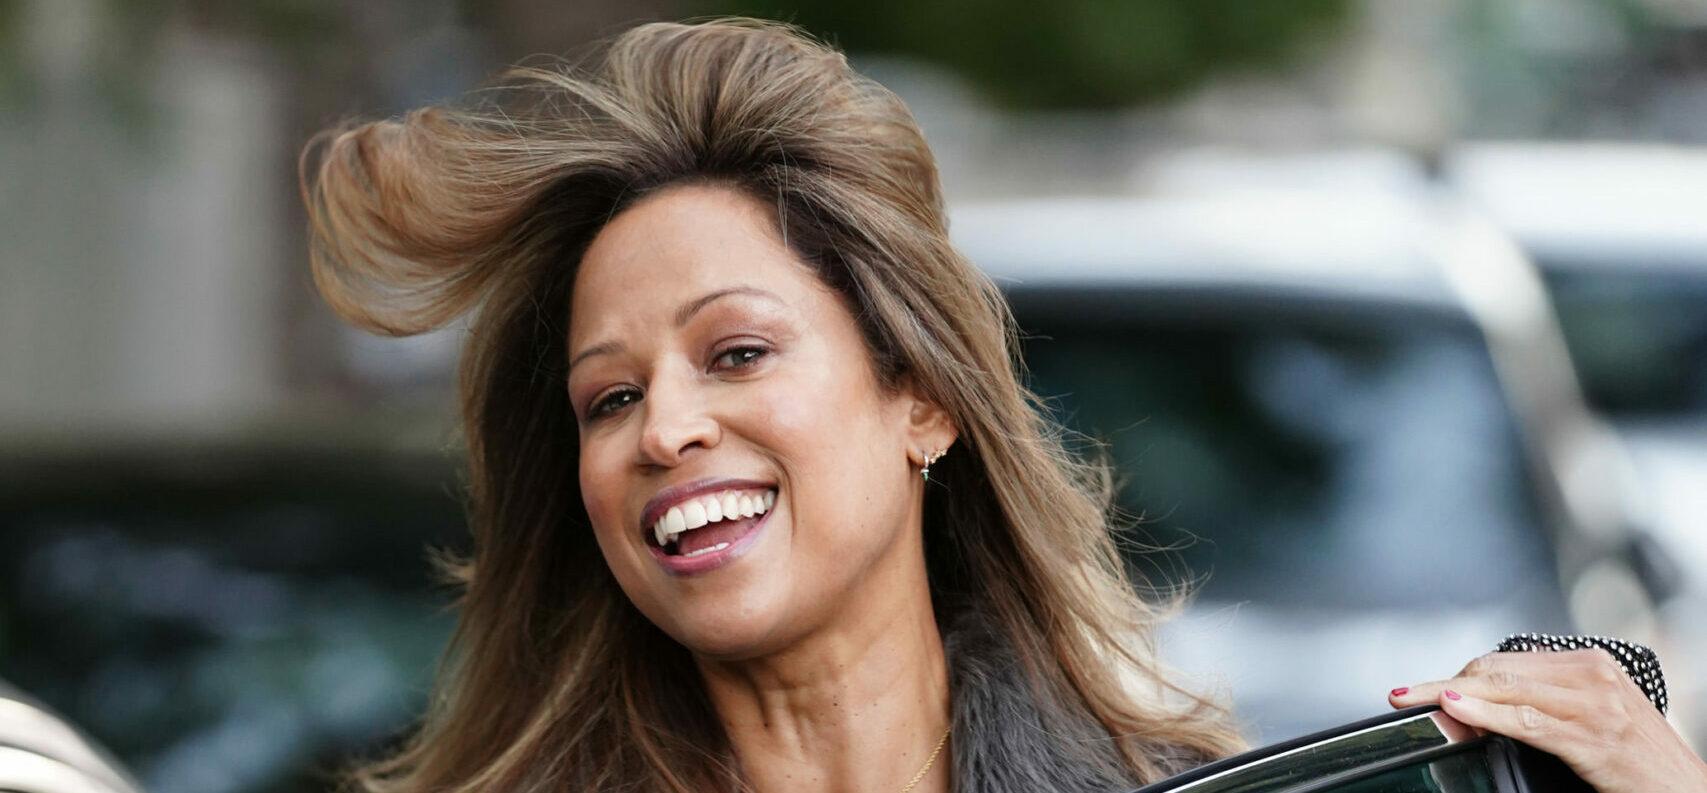 Stacey Dash out and about on her birthday